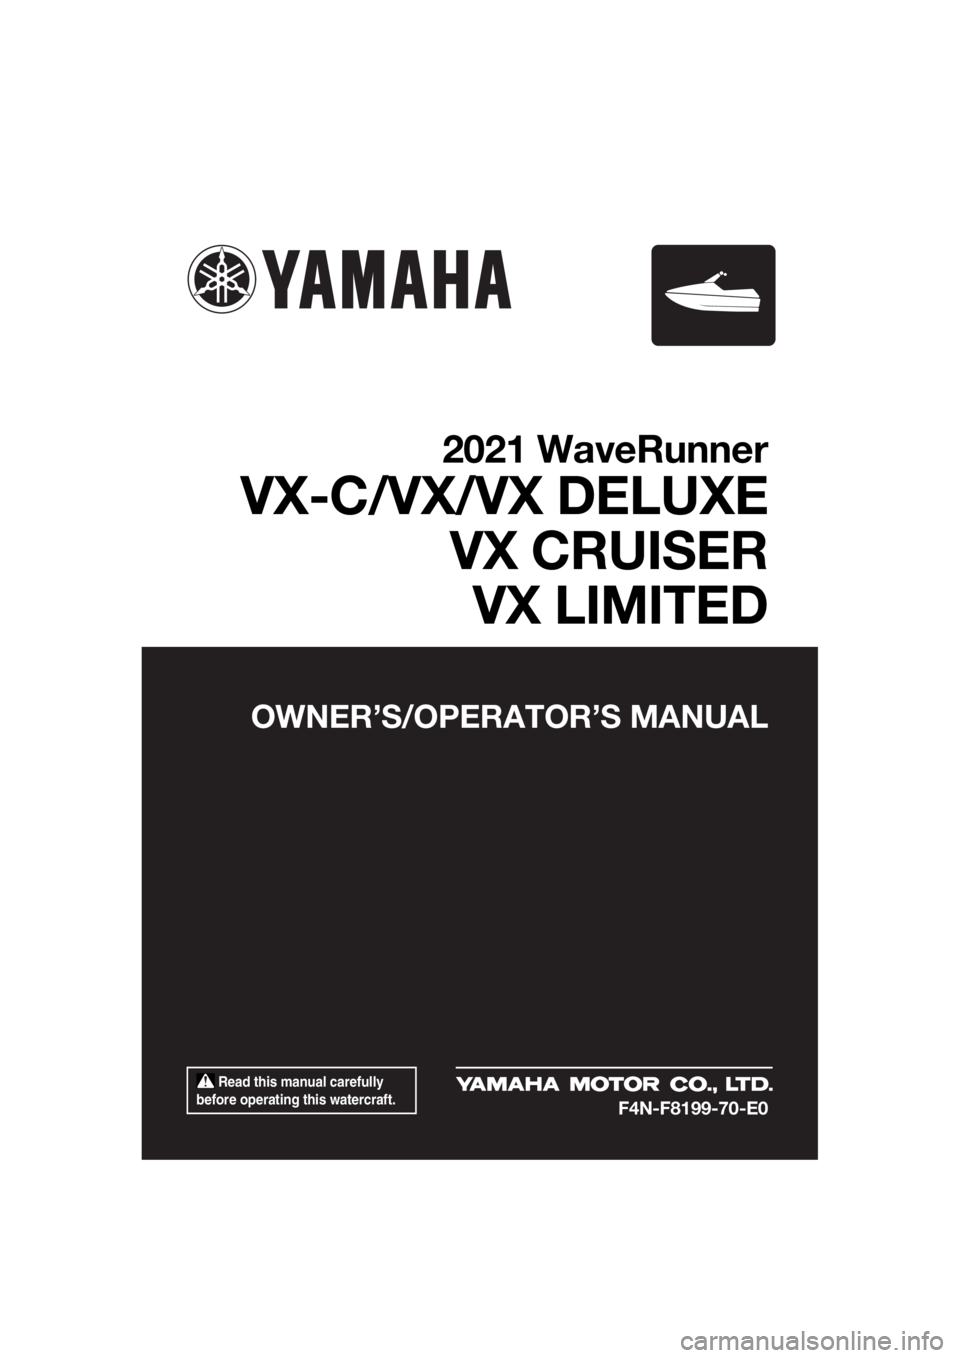 YAMAHA VX 2021  Owners Manual  Read this manual carefully 
before operating this watercraft.
OWNER’S/OPERAT OR’S MANUAL
2021 WaveRunner
VX-C/VX/VX DELUXE
VX CRUISERVX LIMITED
F4N-F8199-70-E0
UF4N70E0.book  Page 1  Tuesday, Oct